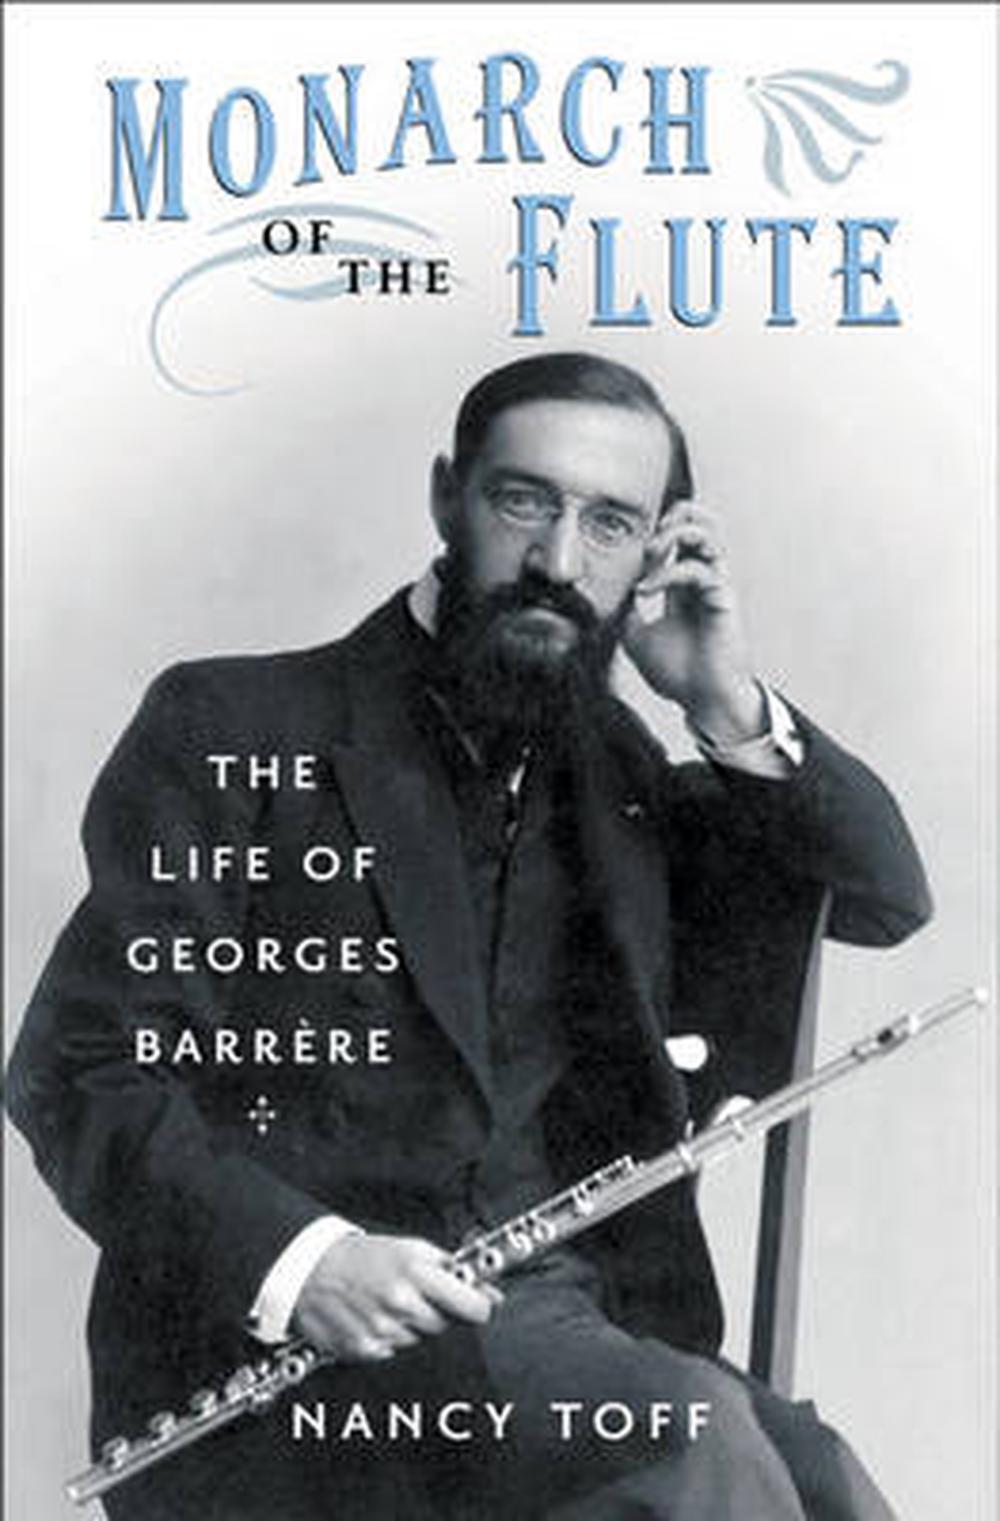 Monarch of the Flute: The Life of Georges Barrere by Nancy Toff (English) Hardco